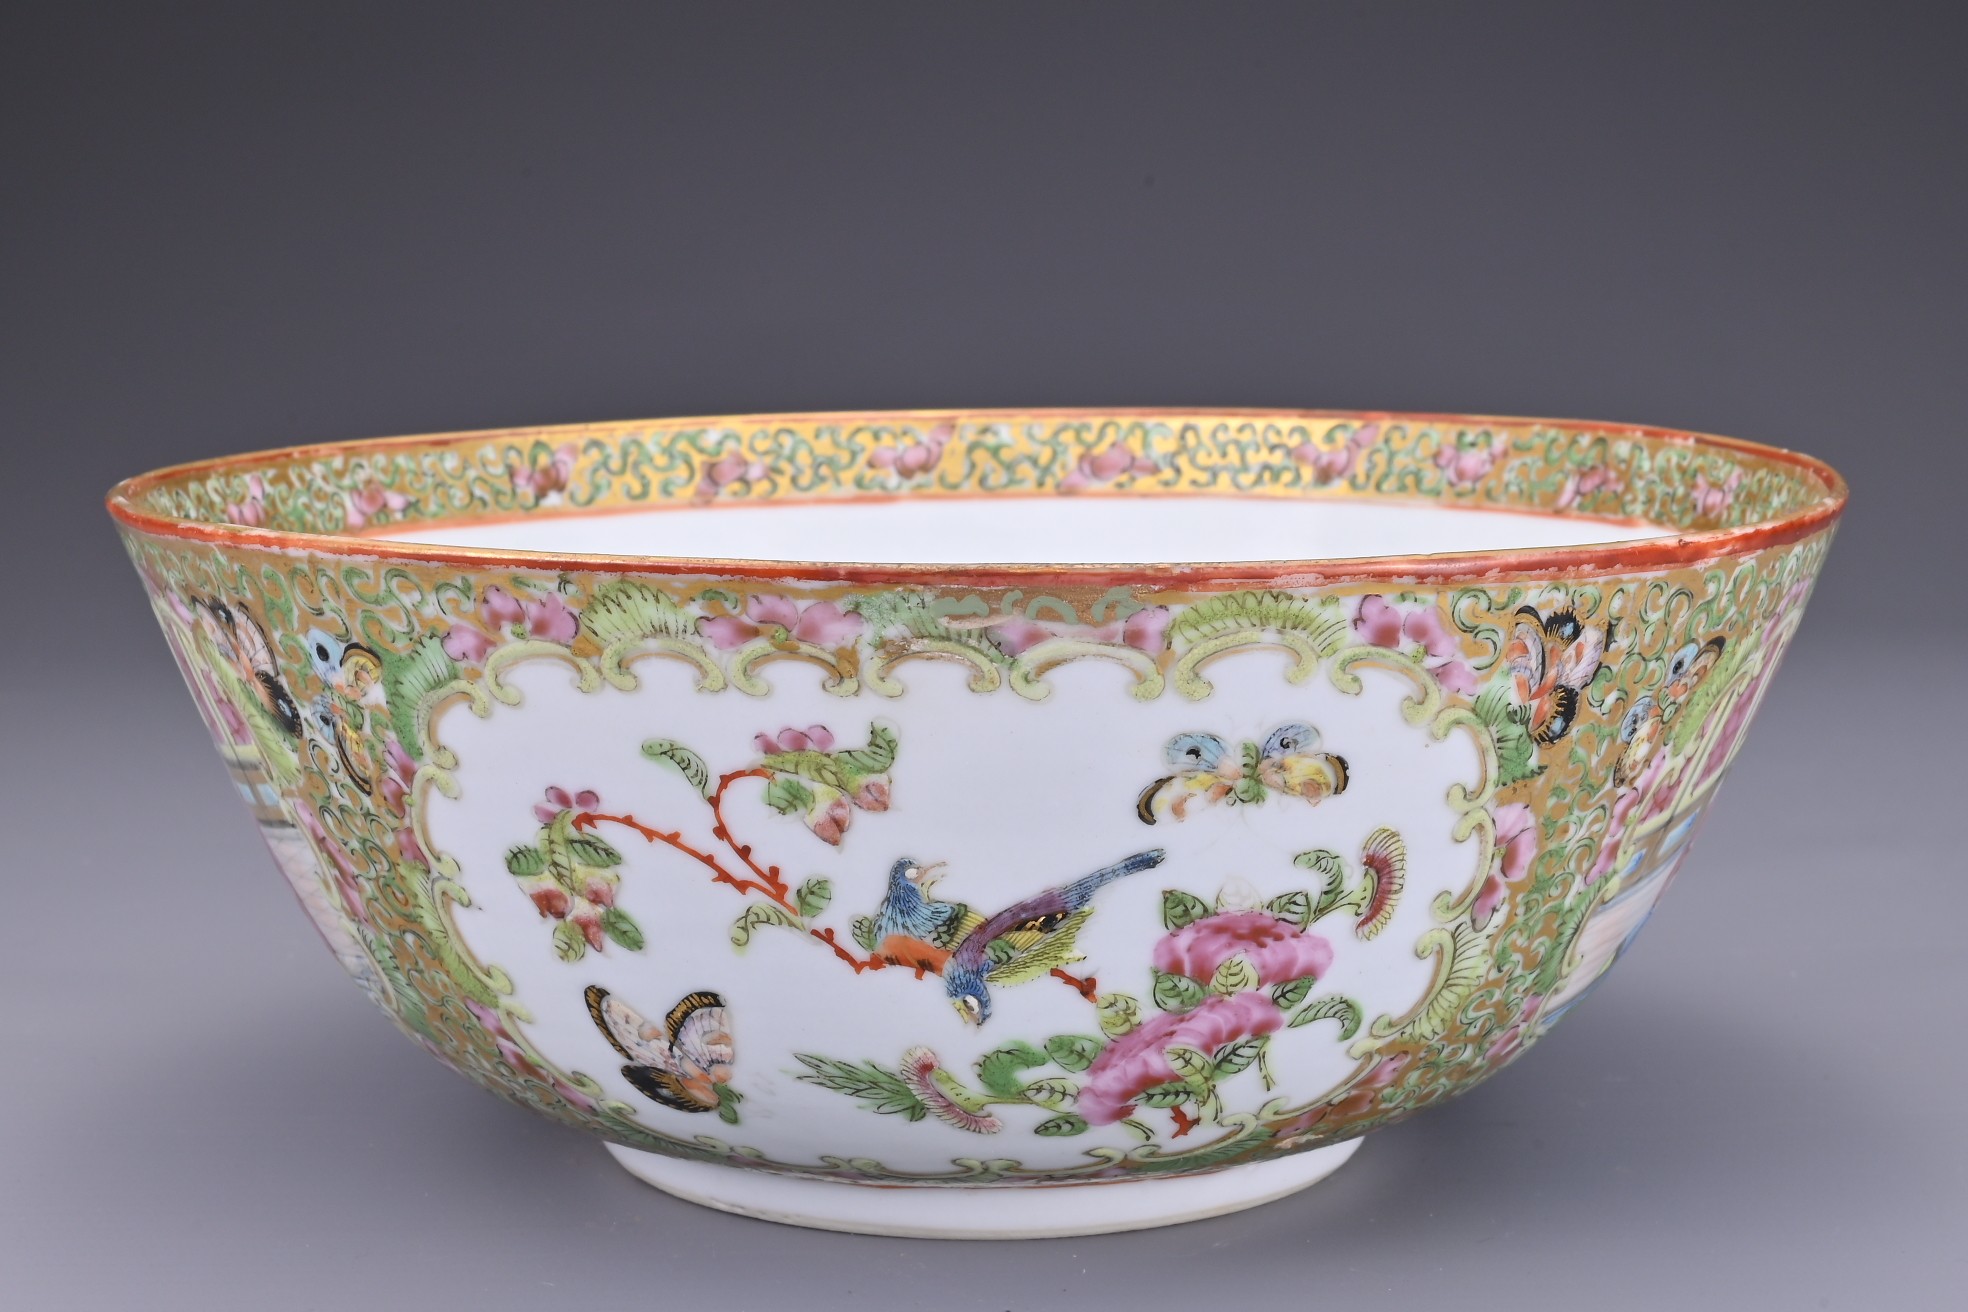 A CHINESE CANTON FAMILLE ROSE PORCELAIN BOWL, 19TH CENTURY. In the rose medallion pattern with - Image 5 of 9